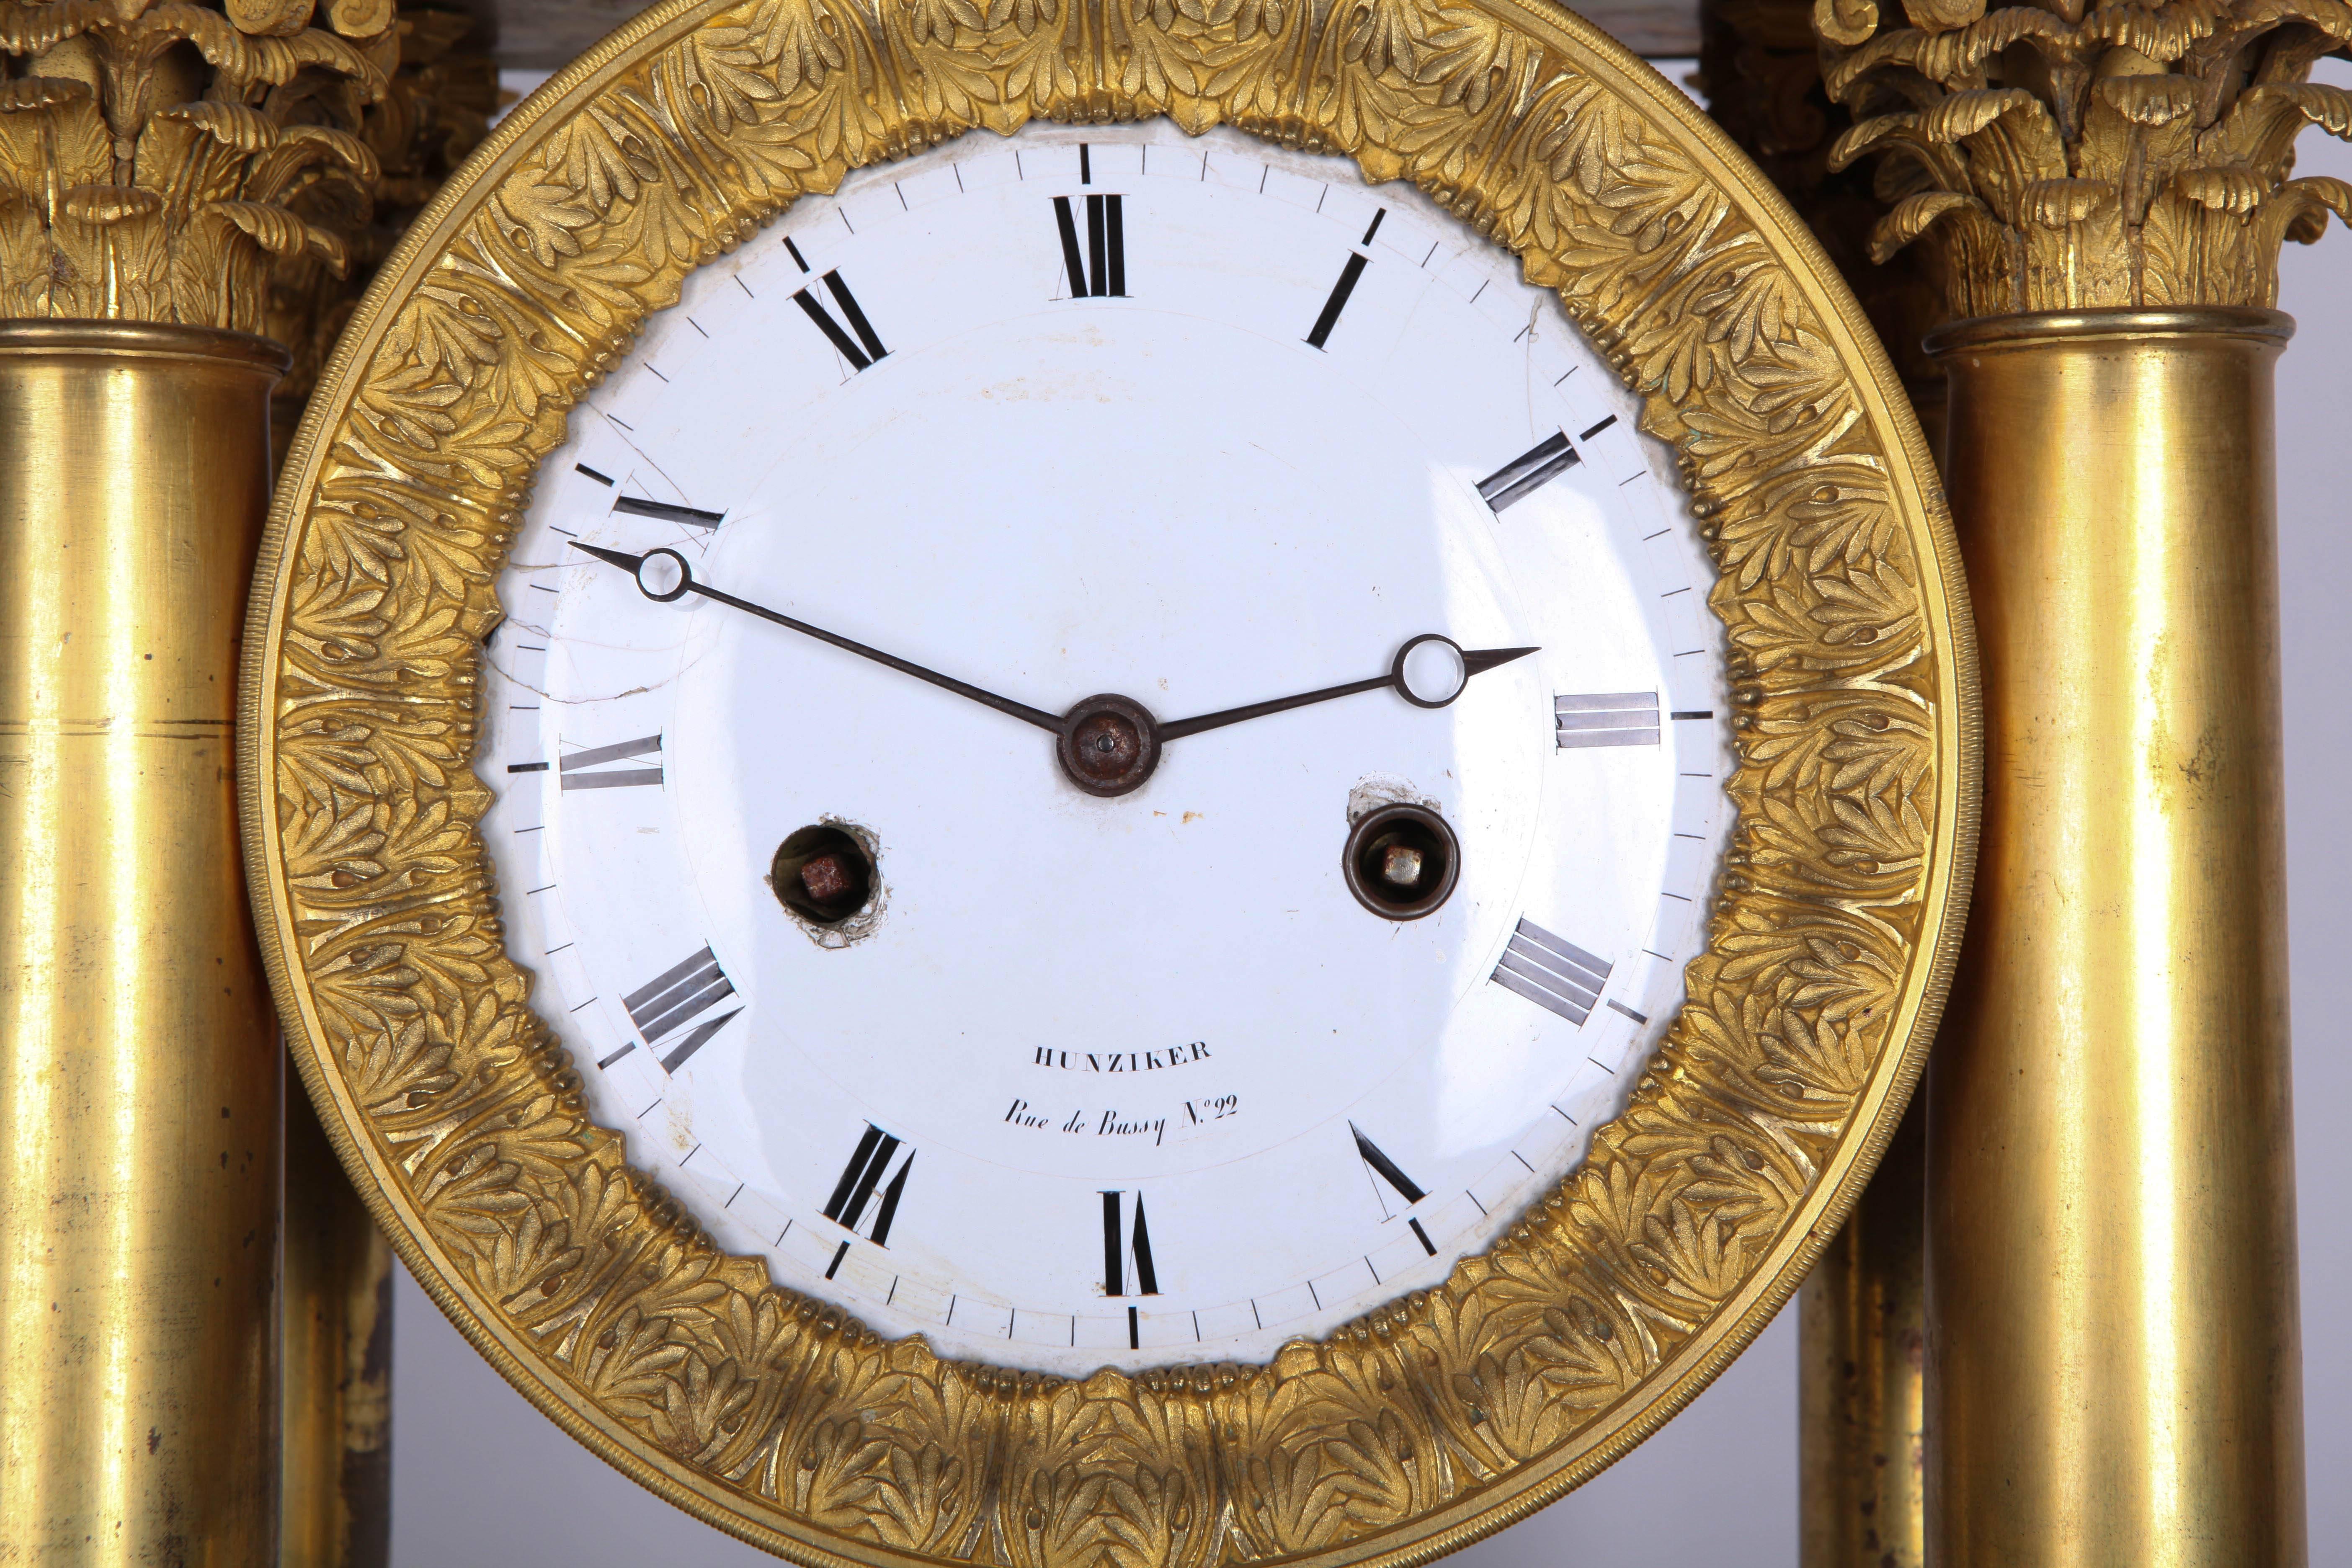 The dial with Roman numerals is signed 'Hunziker Rue de Bussy N° 22' and shows minor cracks.